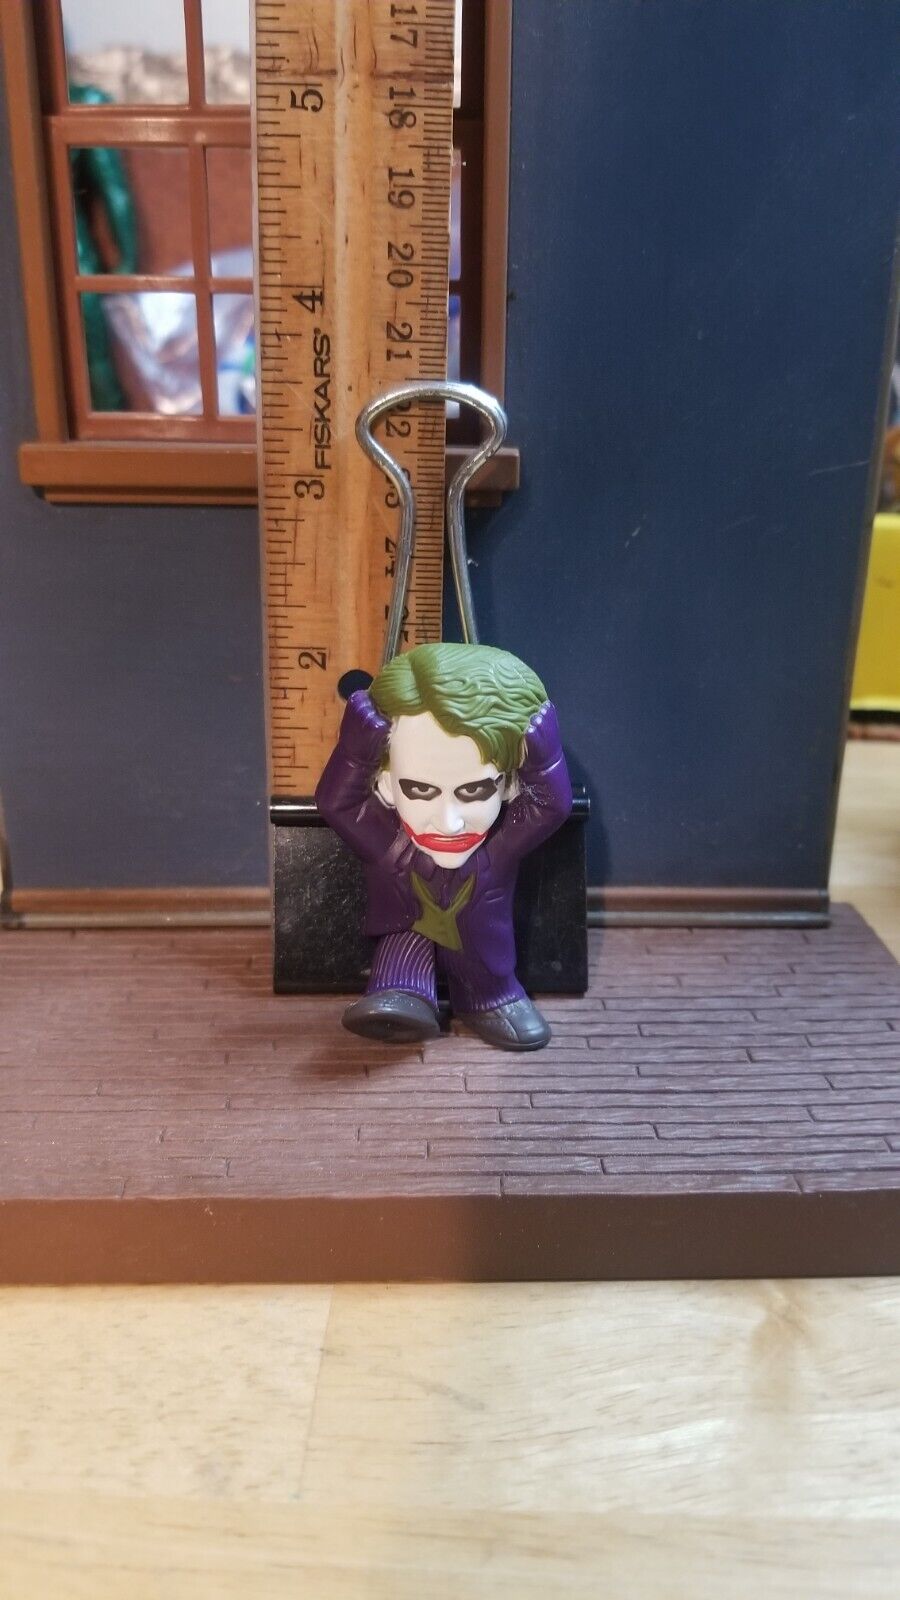 The Dark Knight The Joker Cereal Toy Figure General Mills 2.5"